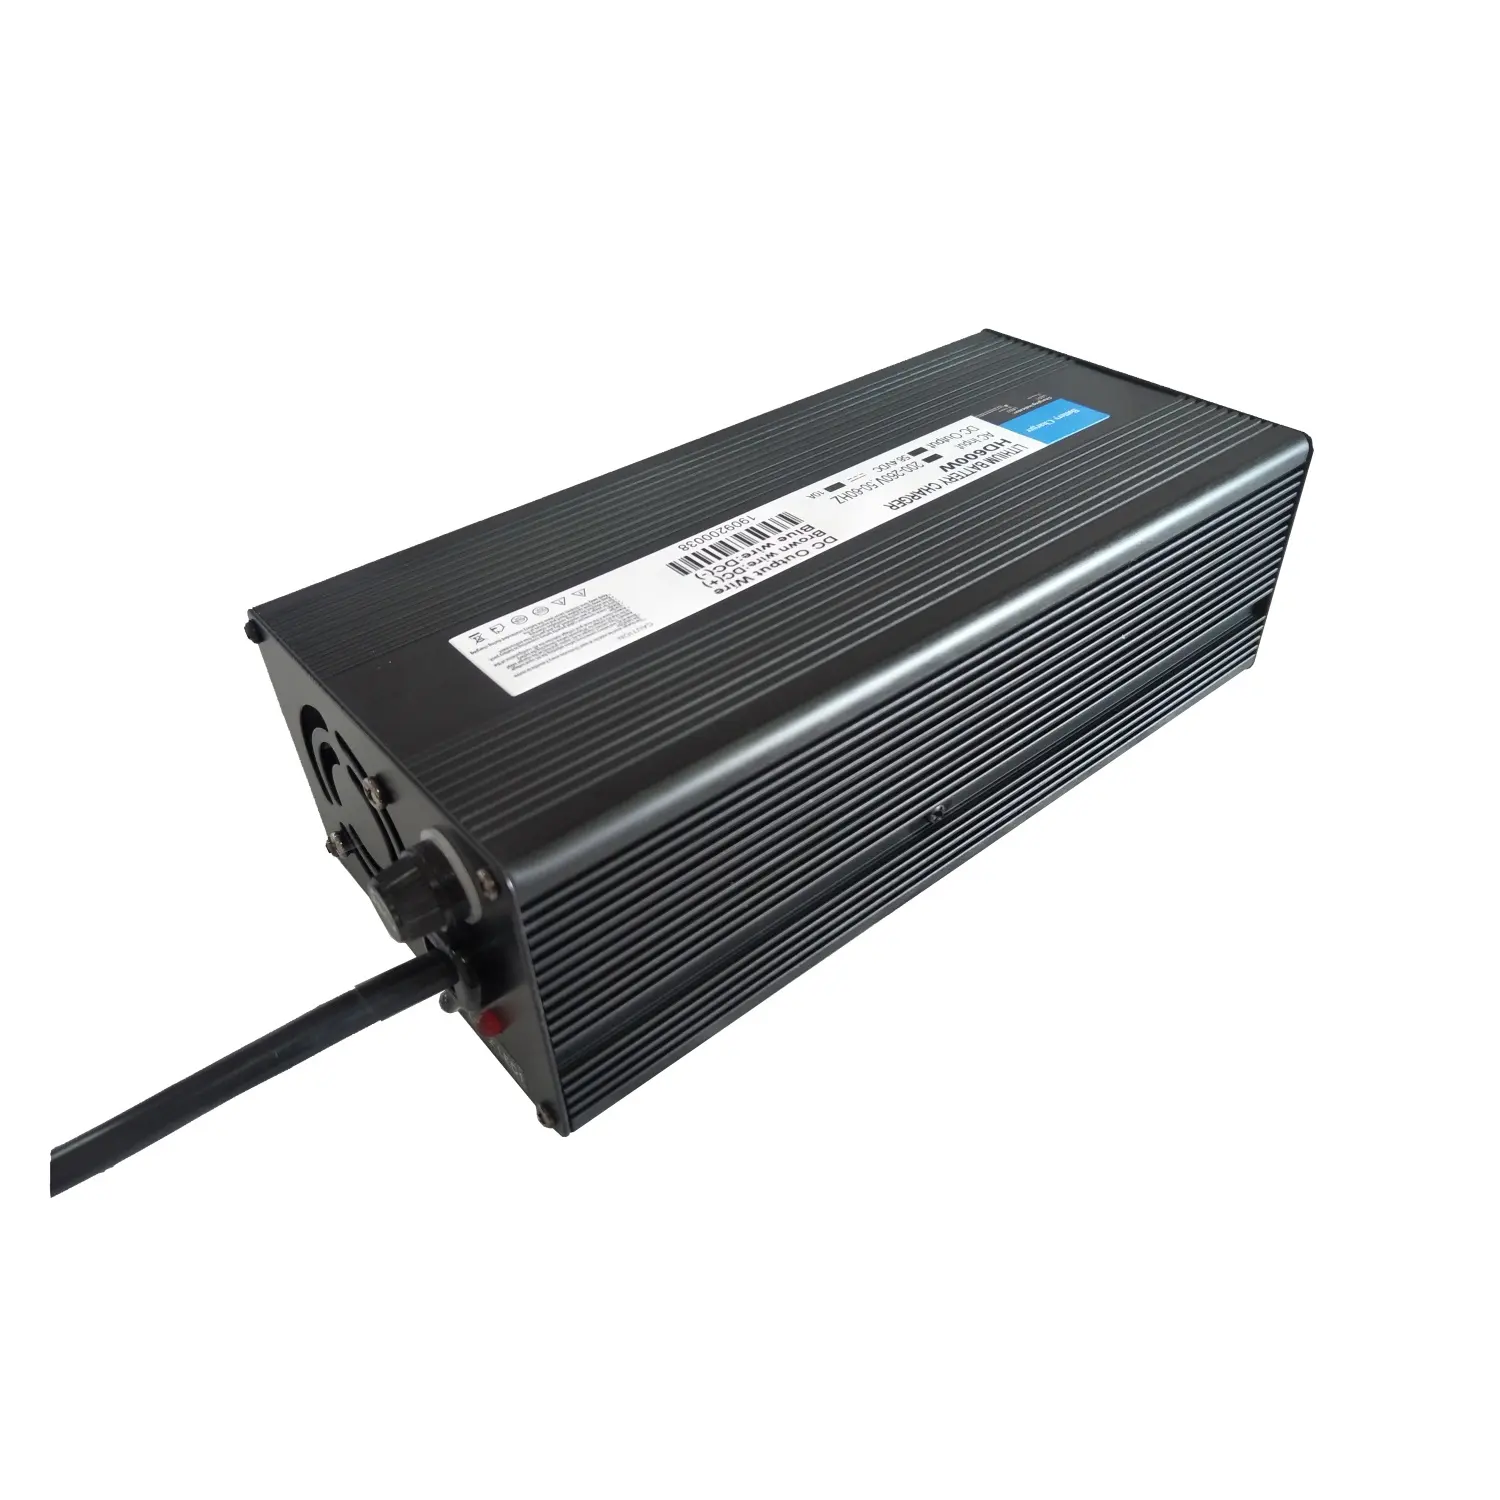 48V 58.8V10A 58.4V10A 600W battery charger lipo / lifepo4 Gofl Cart Portable charger with KC PSE CE ROHS